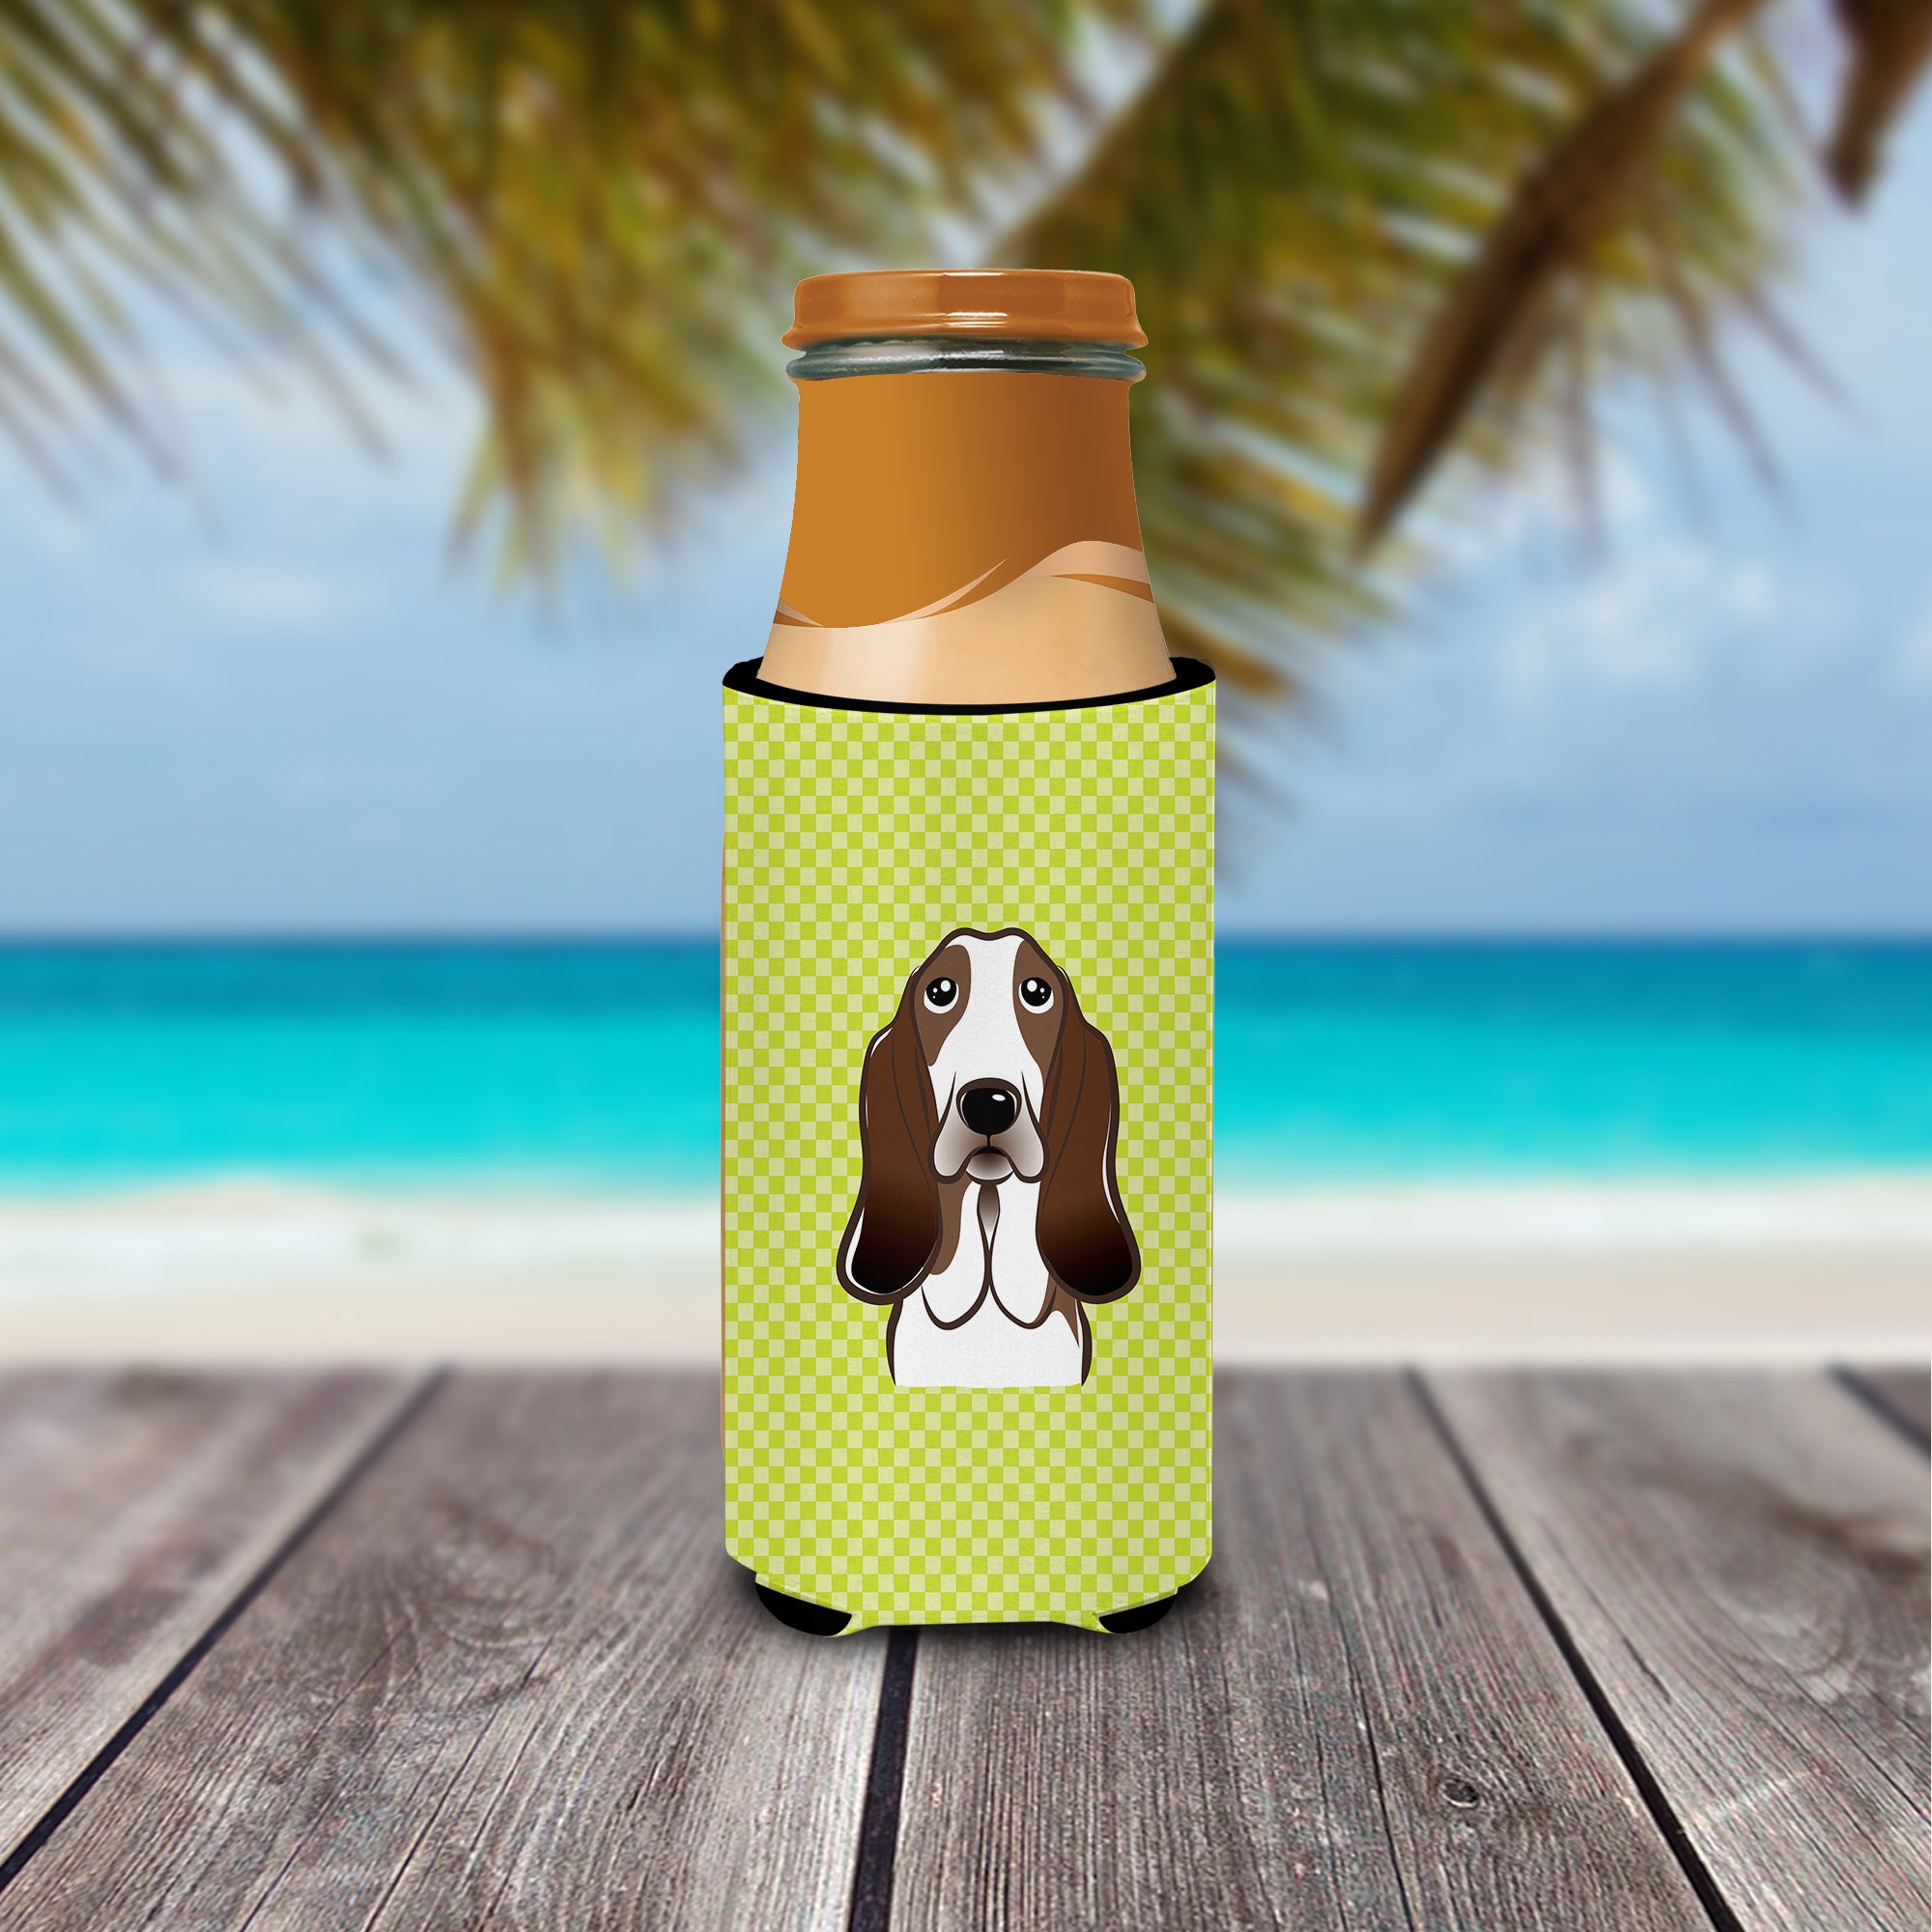 Checkerboard Lime Green Basset Hound Ultra Beverage Insulators for slim cans.